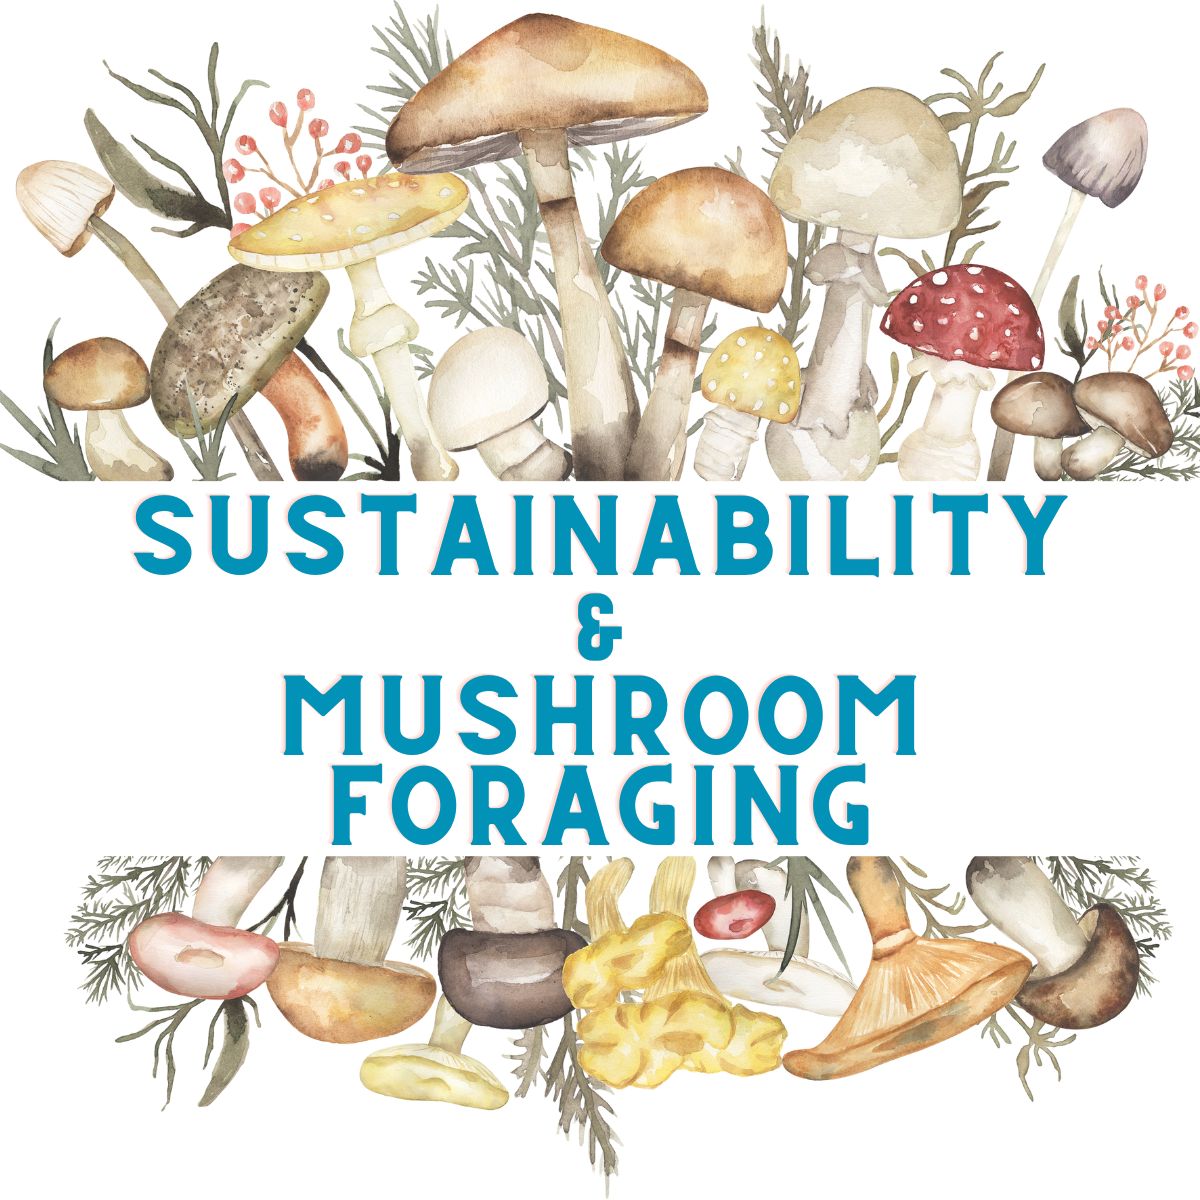 mushroom foraging packing list and sustainable foraging